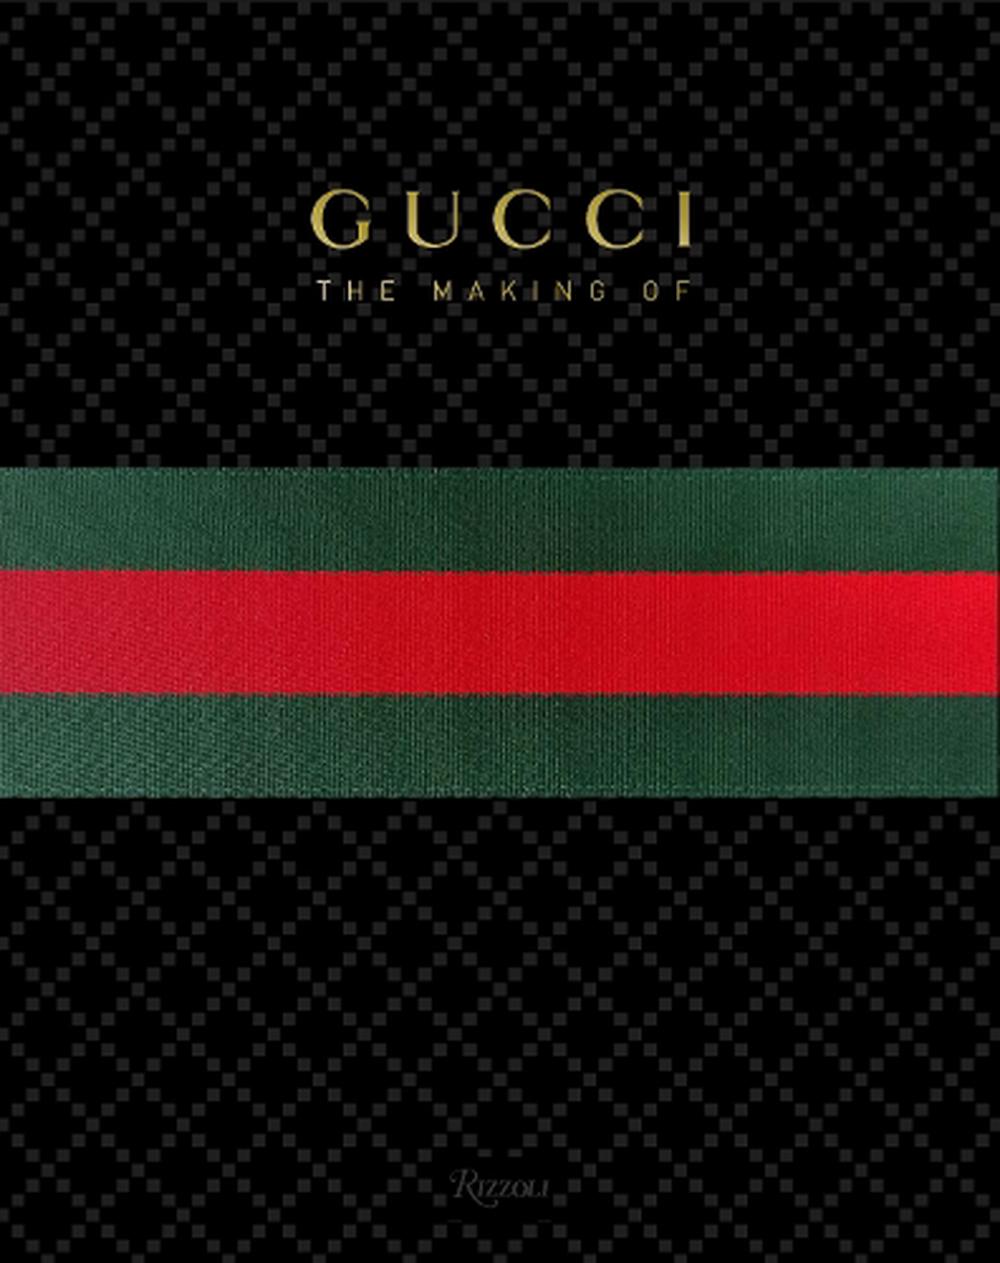 Gucci: The Making of by Maria Luisa Frisa, 9780847836796 | Buy online at The Nile